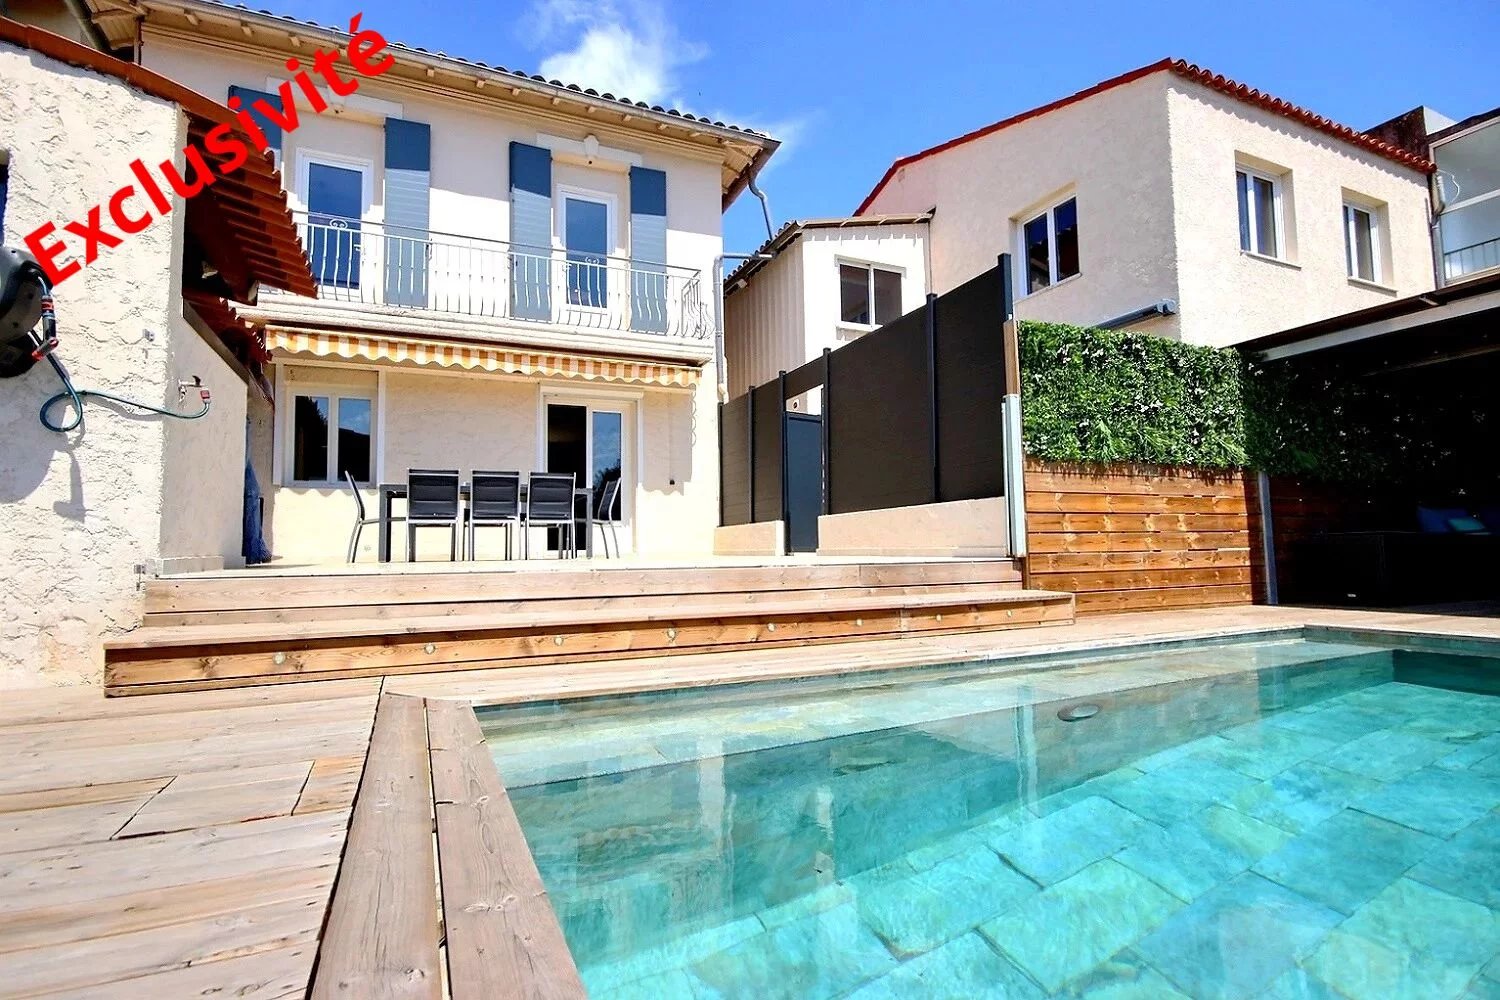 For Sale: Villa with an independent apartment and swimming pool